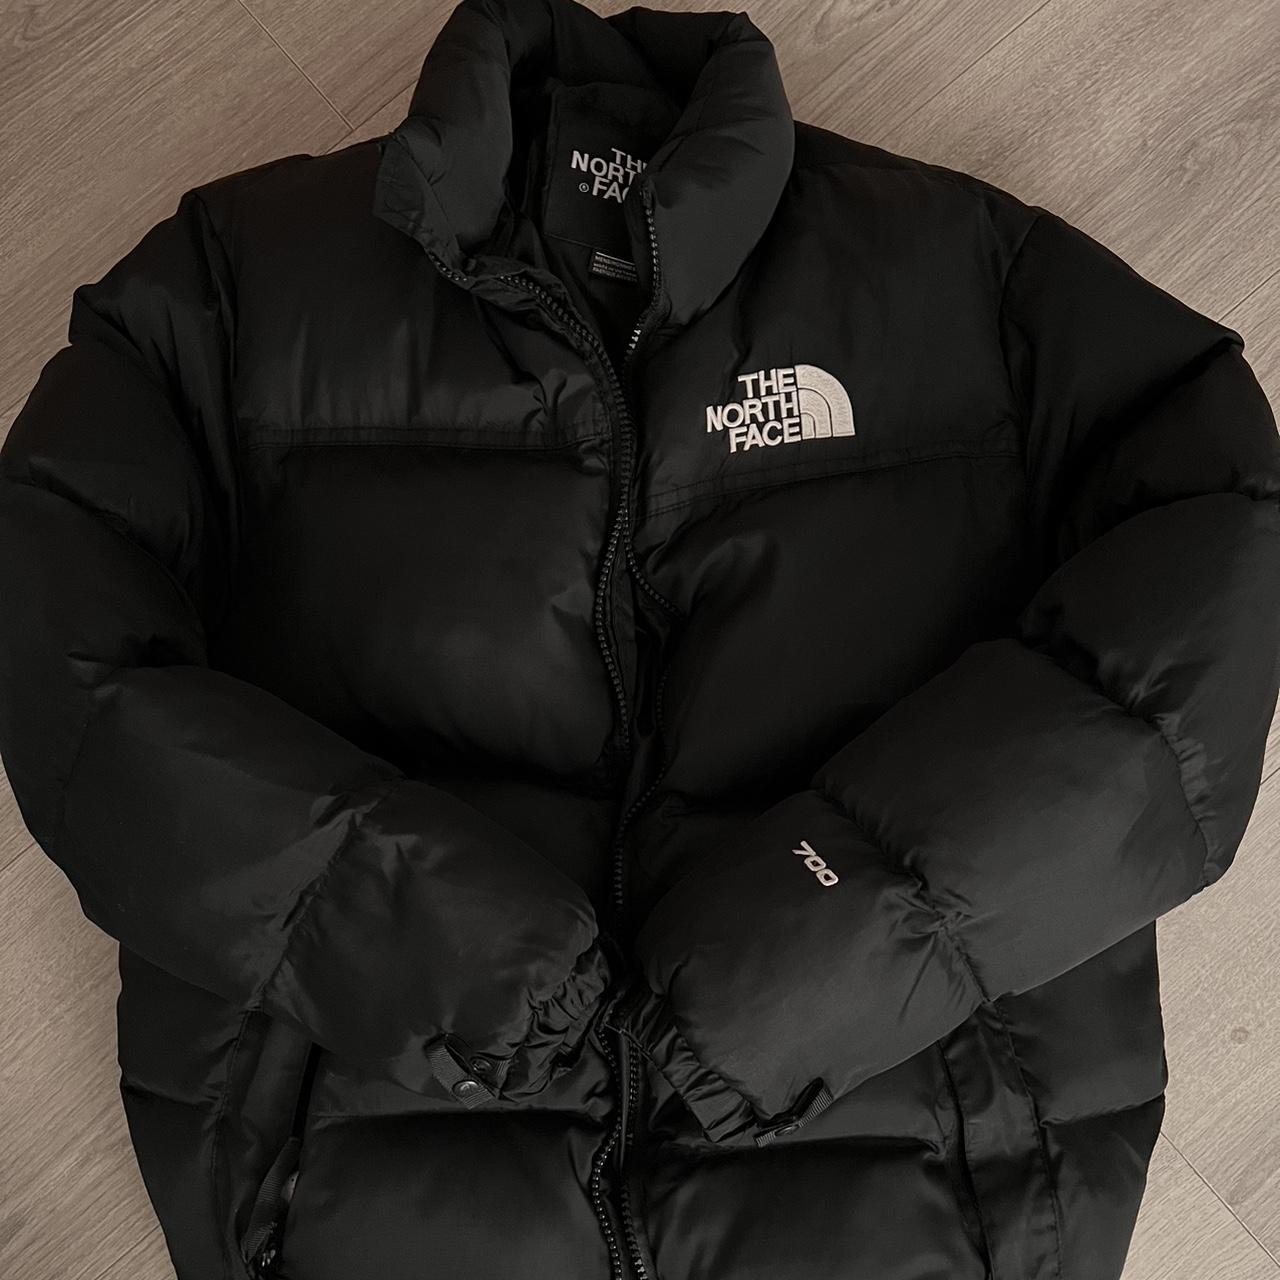 NOT AUTHENTIC North face puffer jacket 700. jacket... - Depop